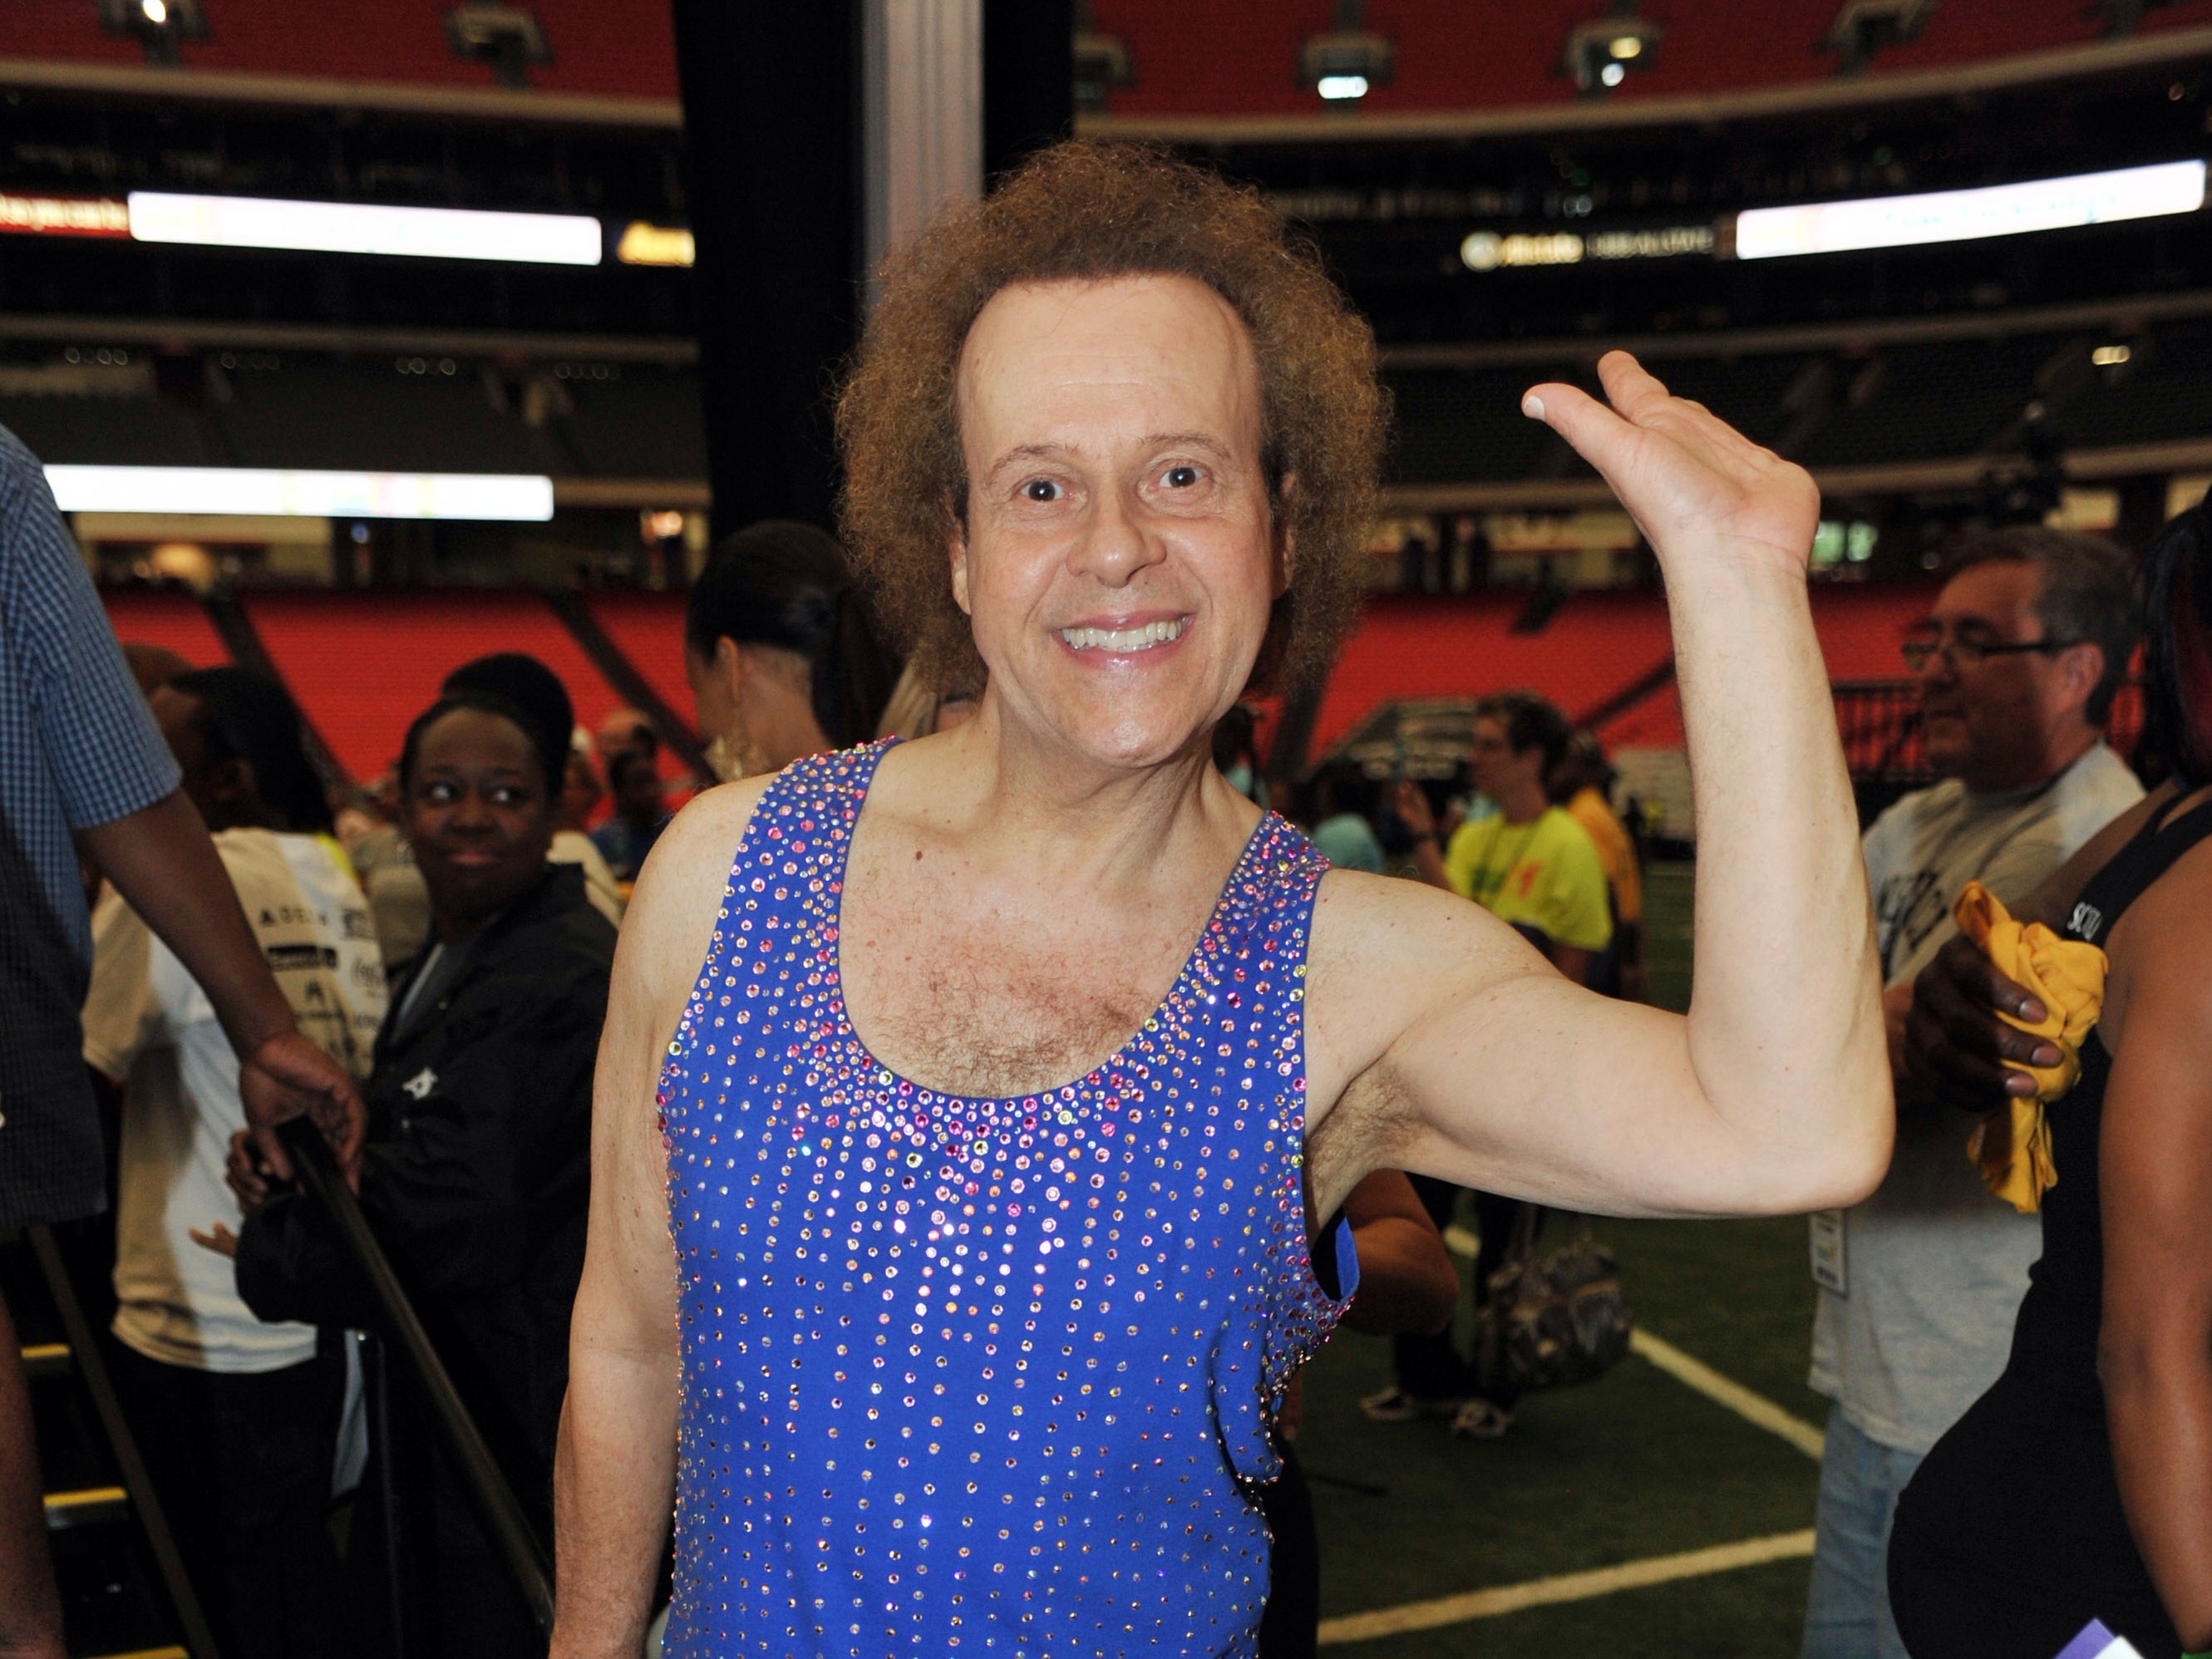 Richard Simmons celebrated his 76th birthday on July 11, one day before his death